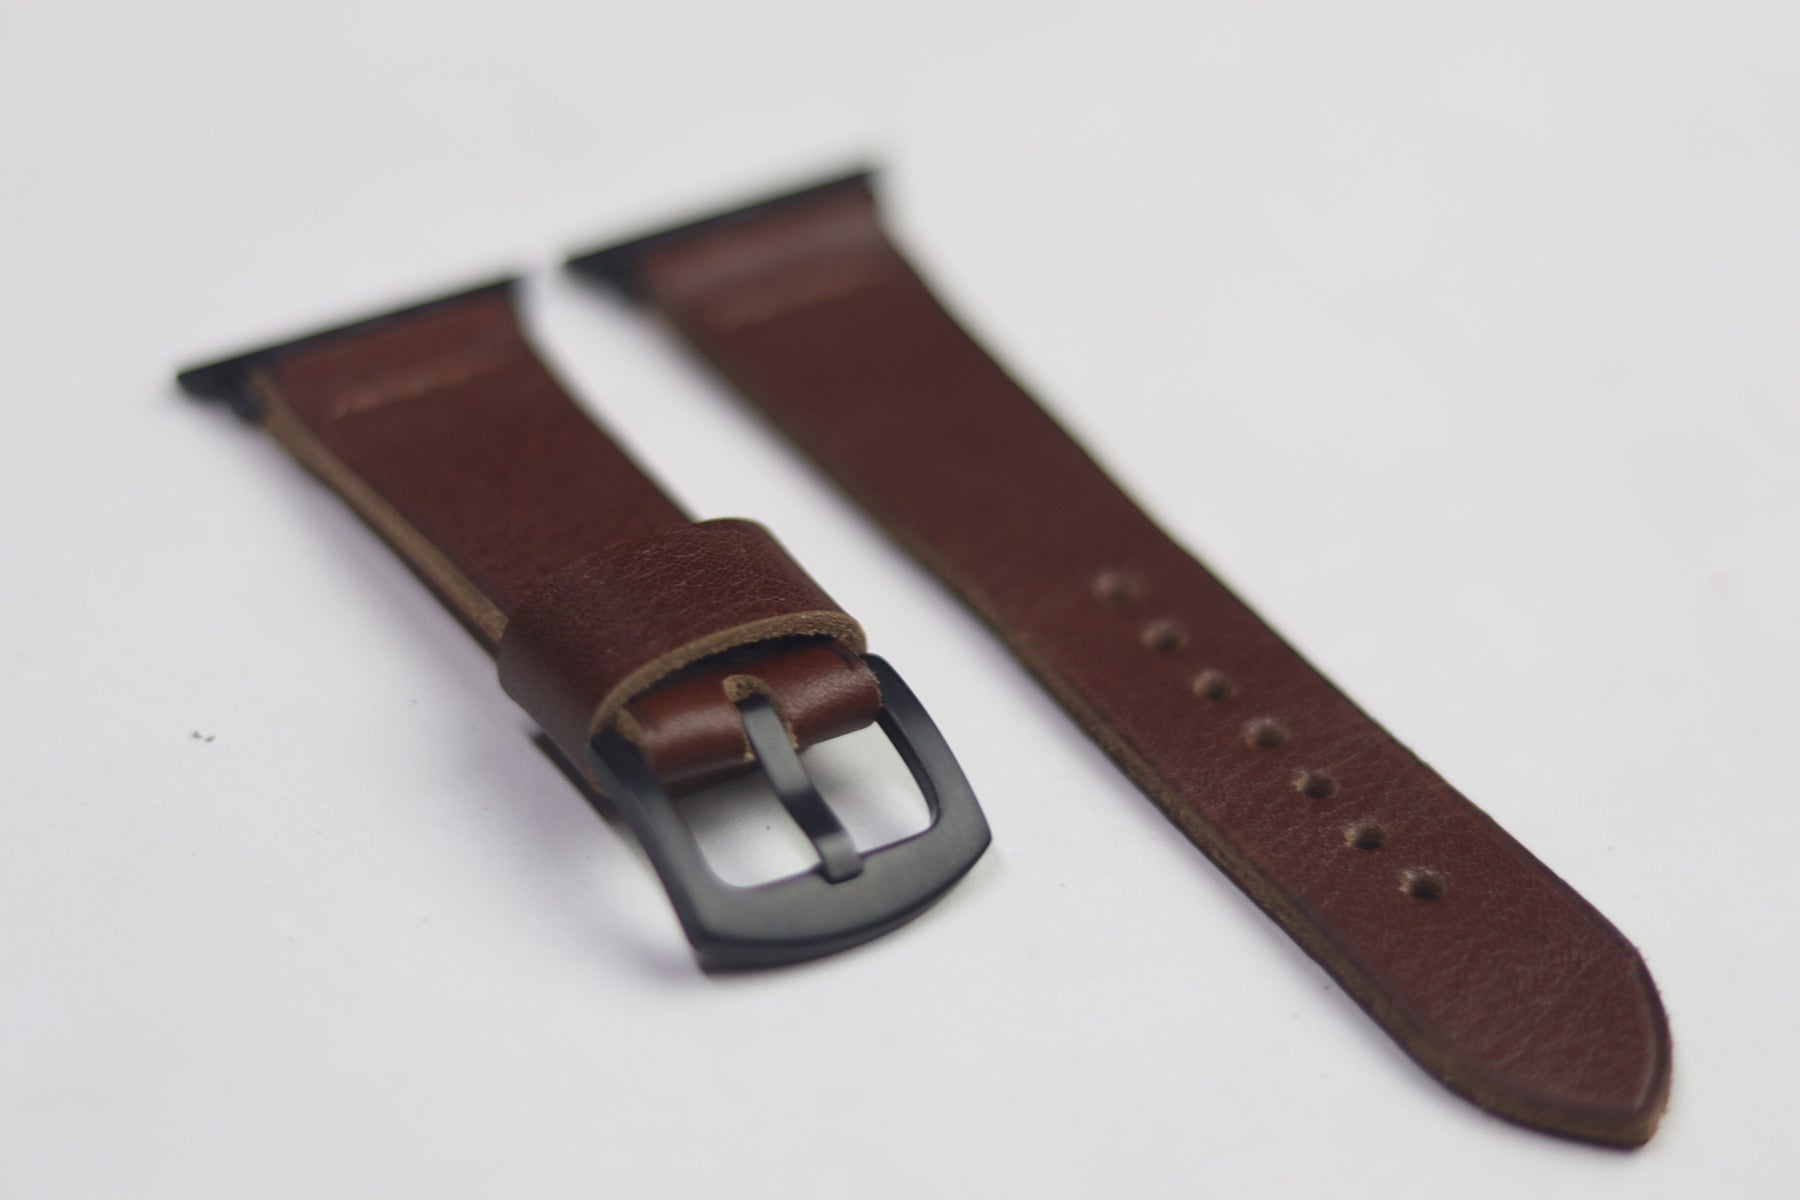 GINGERBREAD BROWN HAND-CRAFTED APPLE WATCH STRAPS